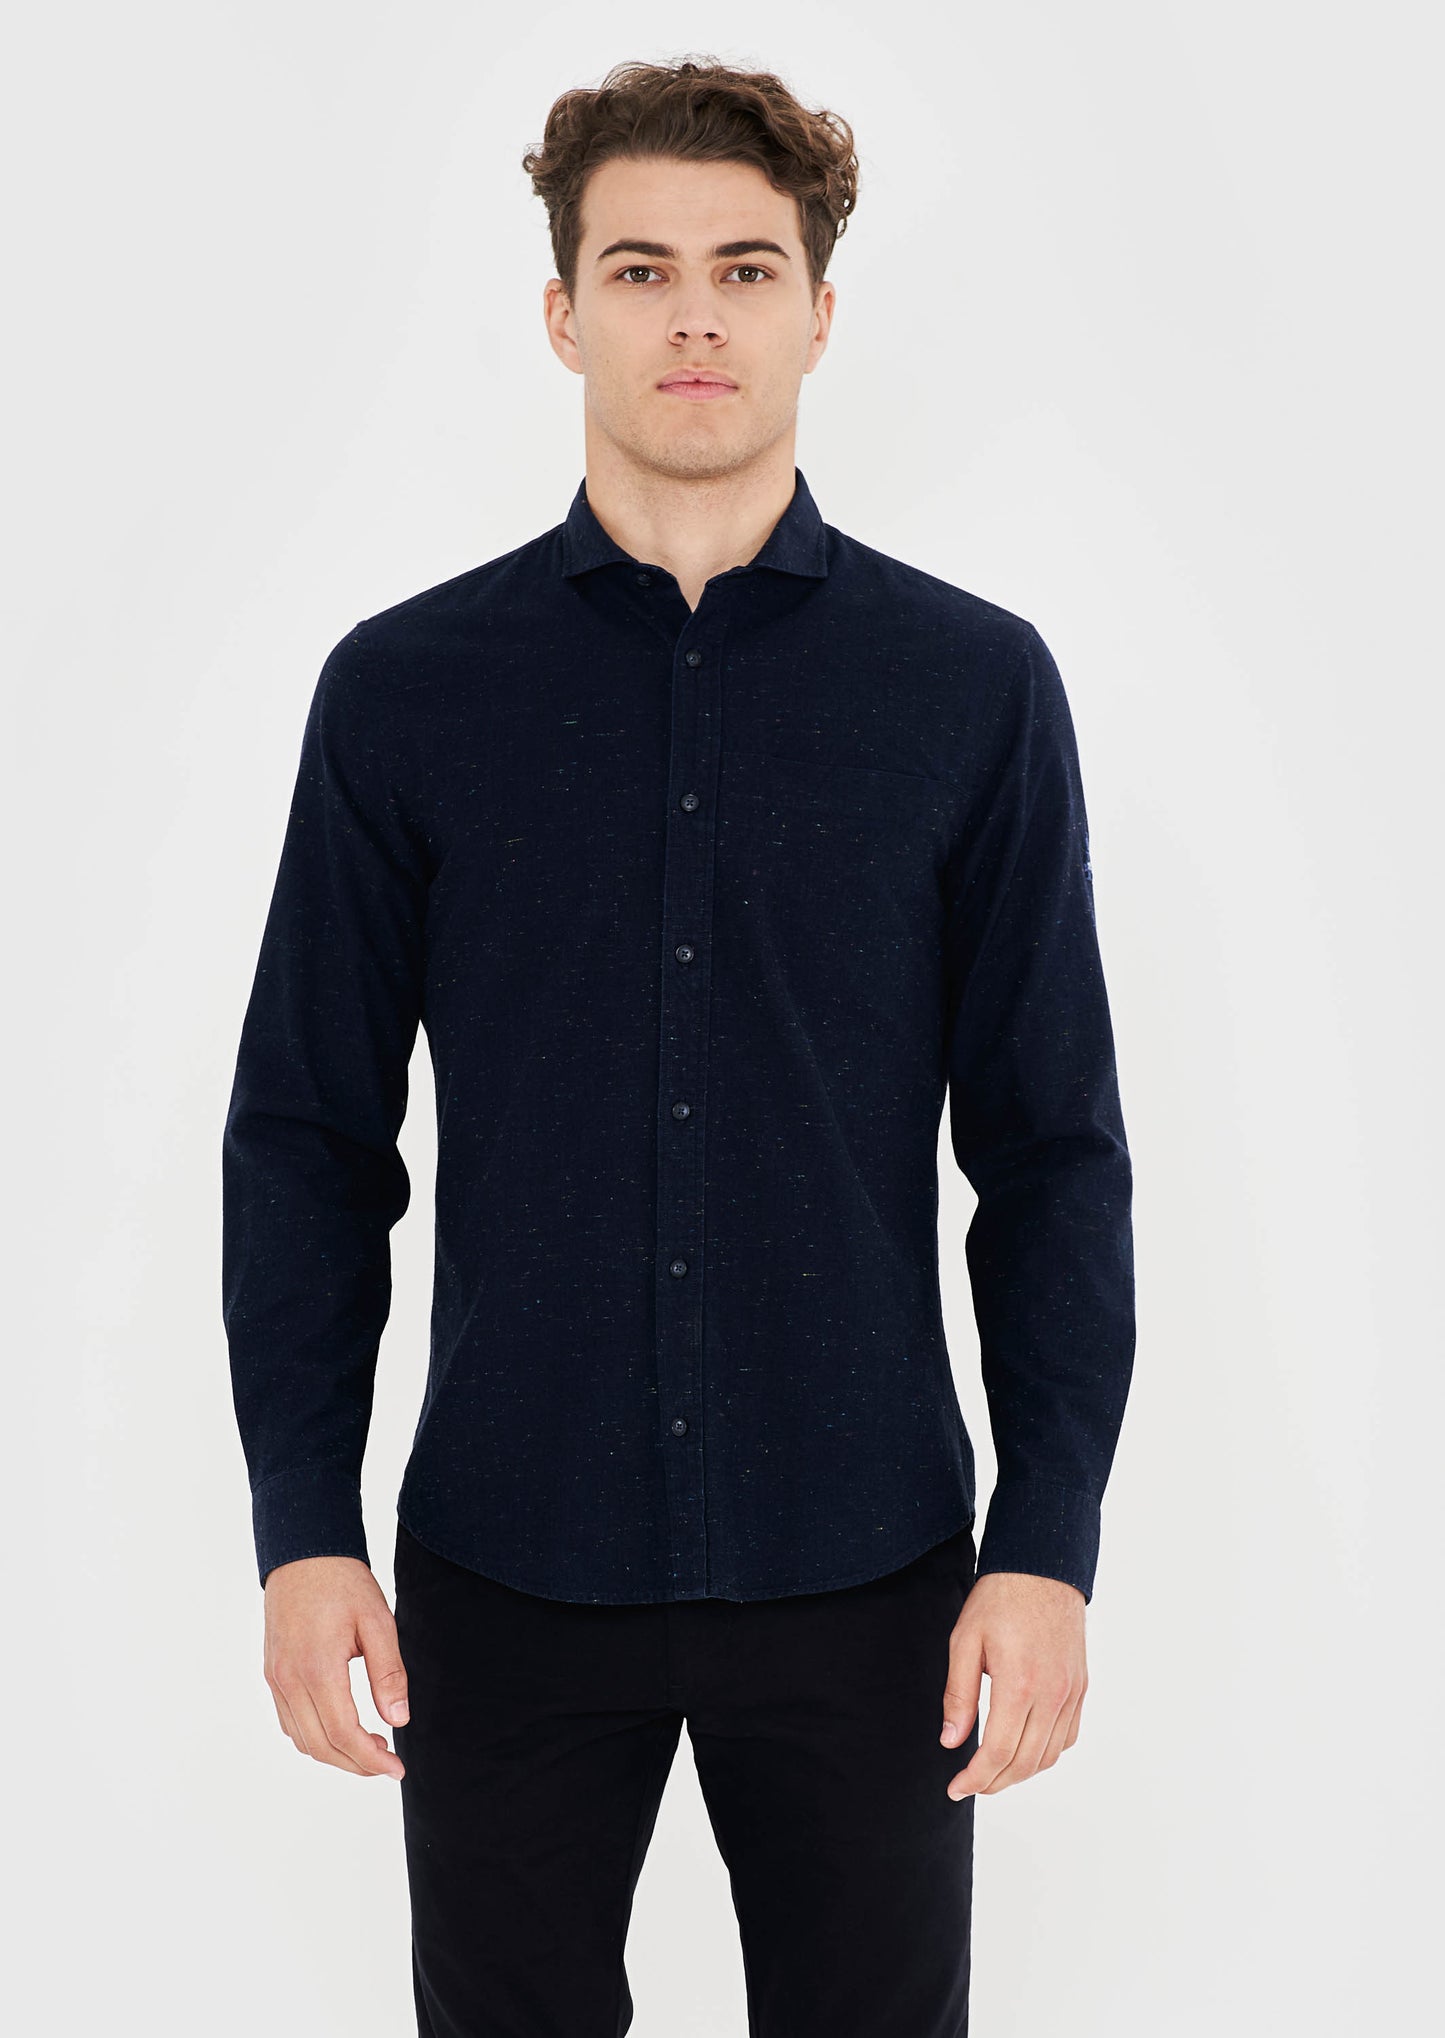 Speckle Check Shirt